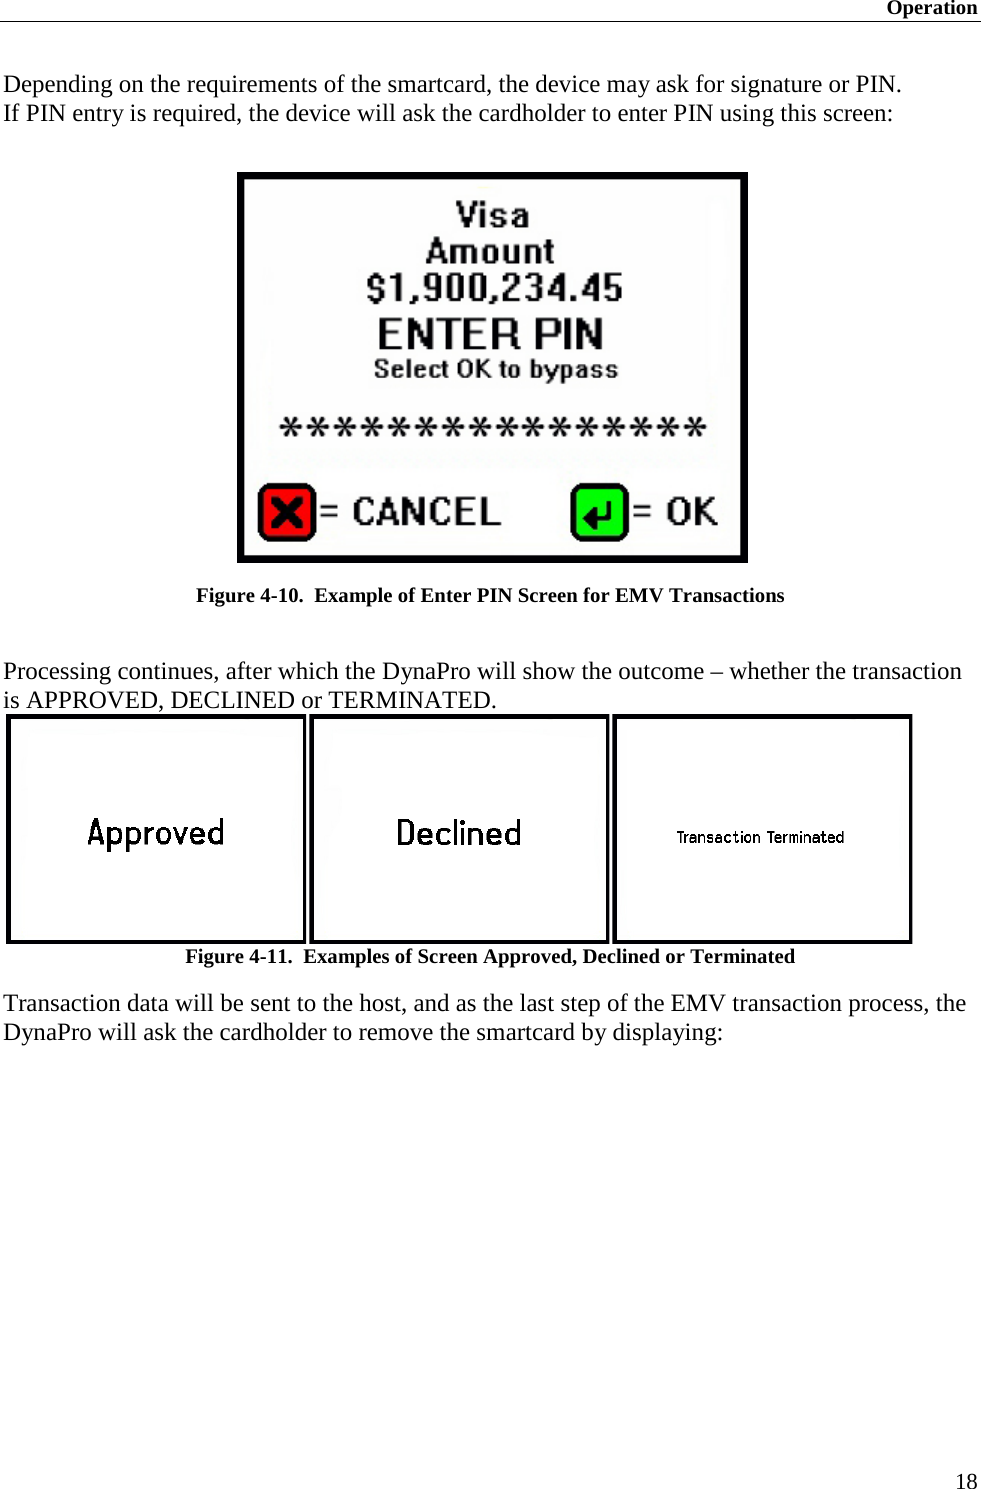 Operation 18 Depending on the requirements of the smartcard, the device may ask for signature or PIN. If PIN entry is required, the device will ask the cardholder to enter PIN using this screen:   Figure 4-10.  Example of Enter PIN Screen for EMV Transactions  Processing continues, after which the DynaPro will show the outcome – whether the transaction  is APPROVED, DECLINED or TERMINATED.  Figure 4-11.  Examples of Screen Approved, Declined or Terminated Transaction data will be sent to the host, and as the last step of the EMV transaction process, the DynaPro will ask the cardholder to remove the smartcard by displaying:   